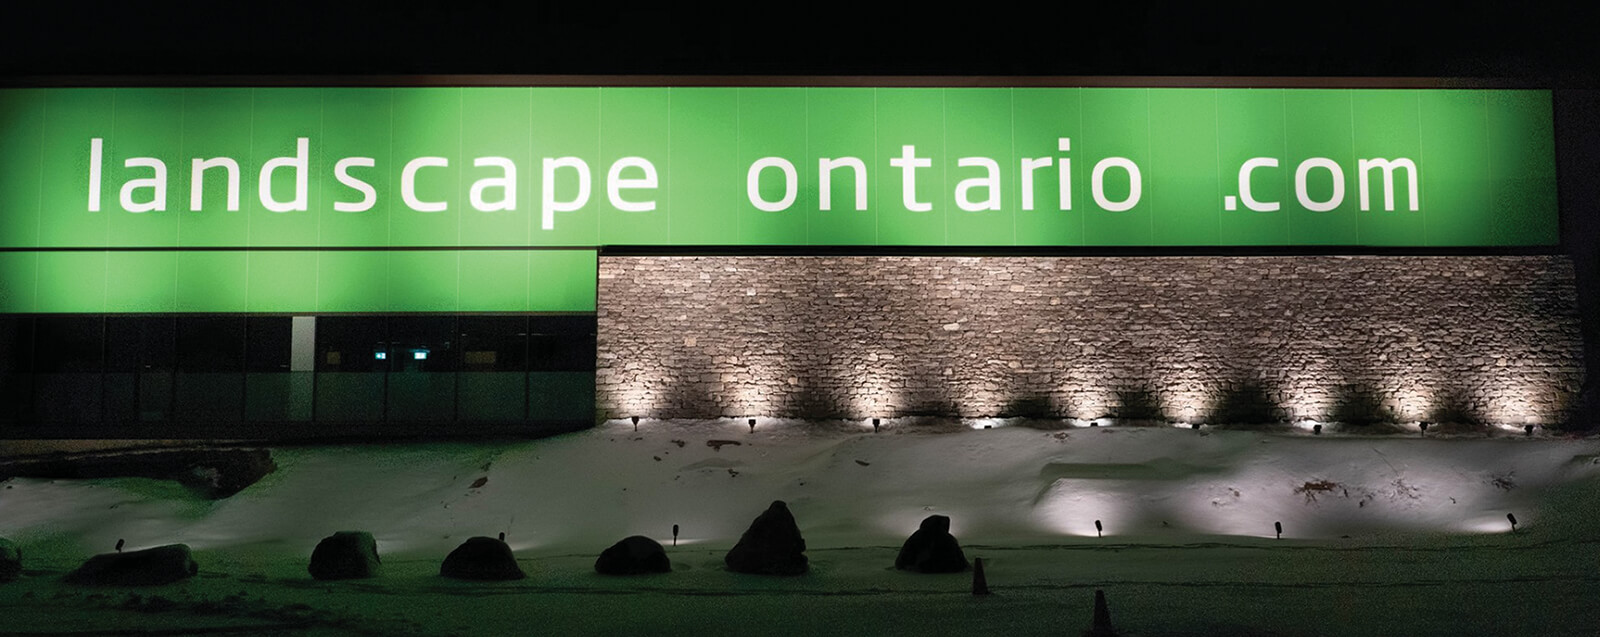 landscape ontario building and sign at night